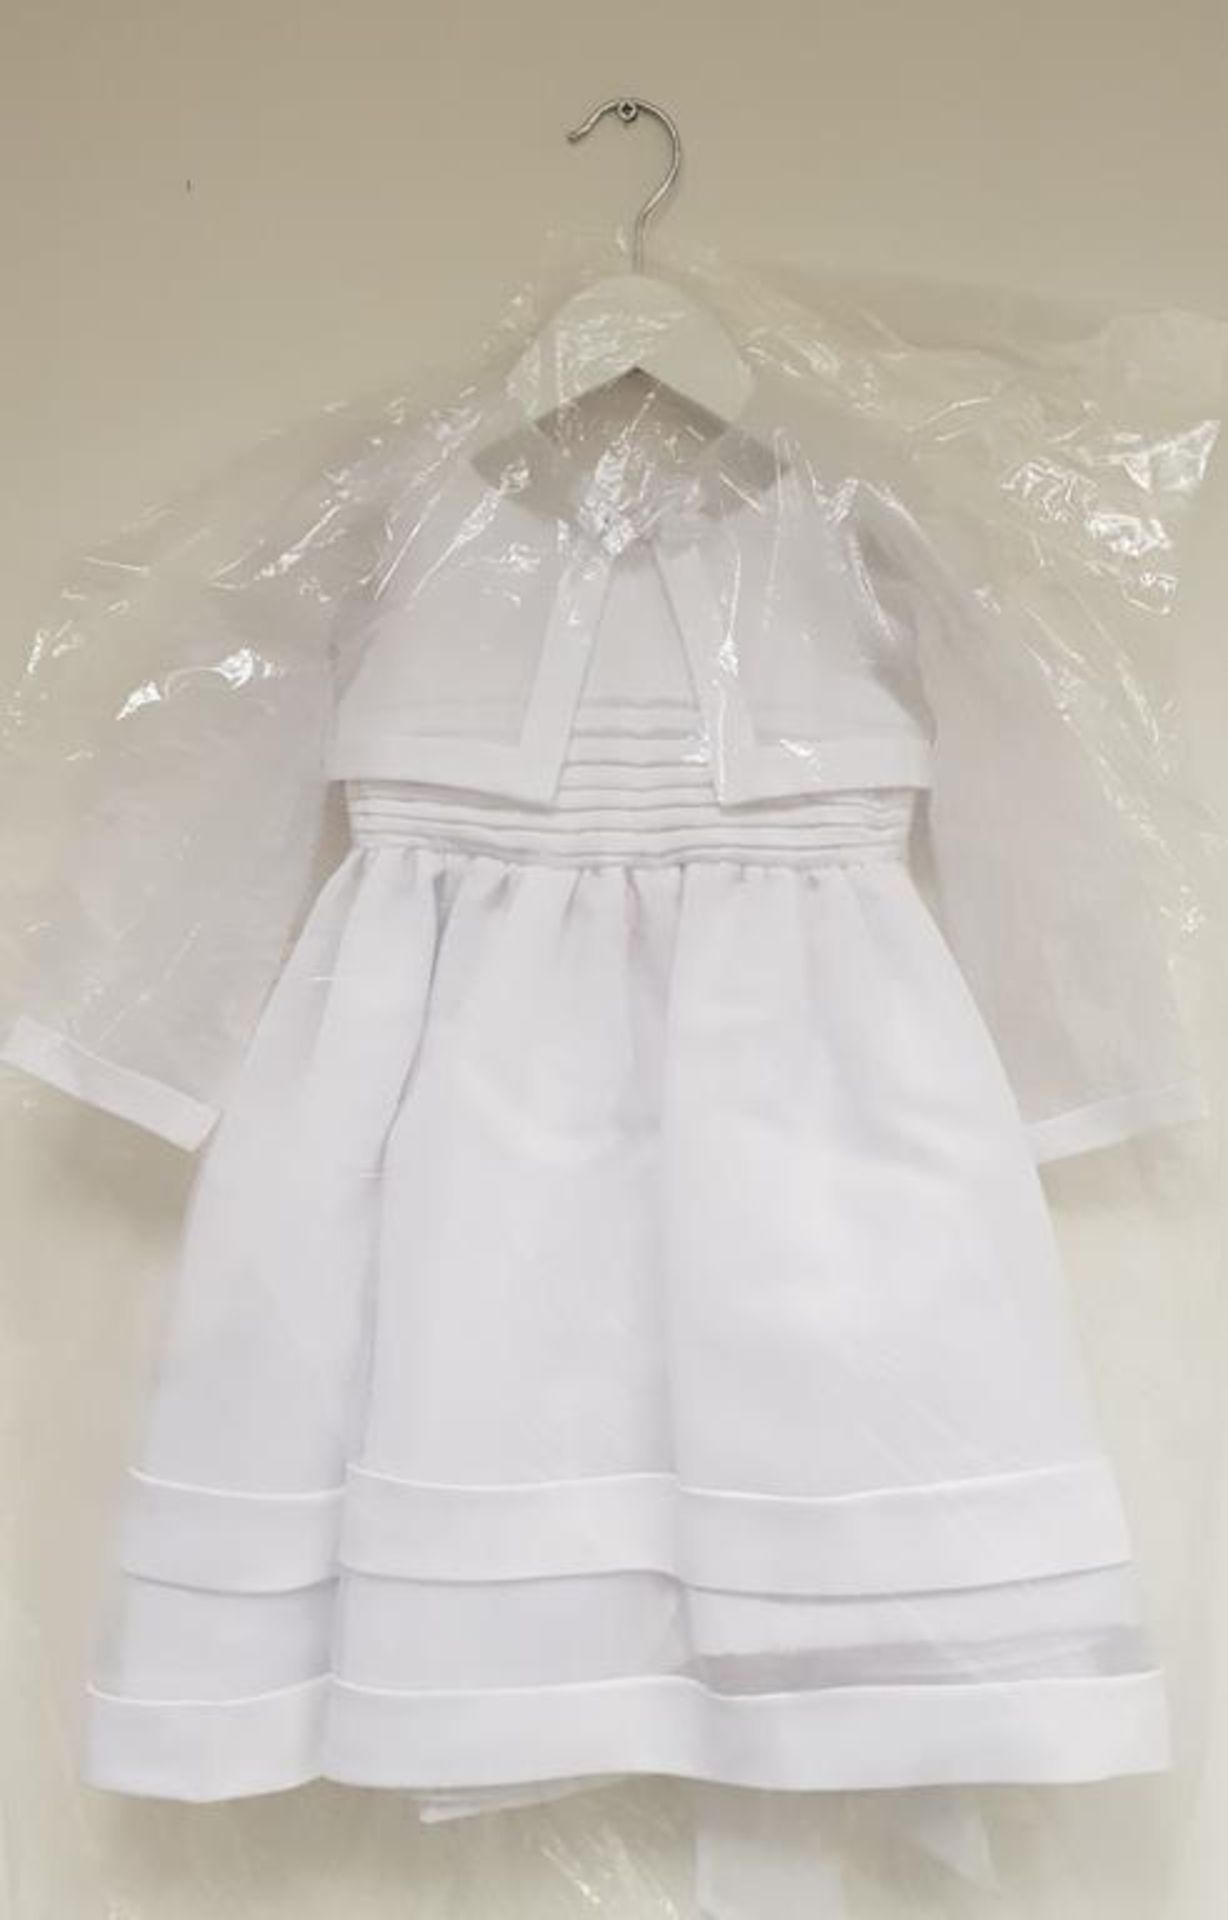 * 17 Childrens Clothing to include Christening/Holy Communion Wear, Makes Sweetie Pie, Jyson, - Image 15 of 16